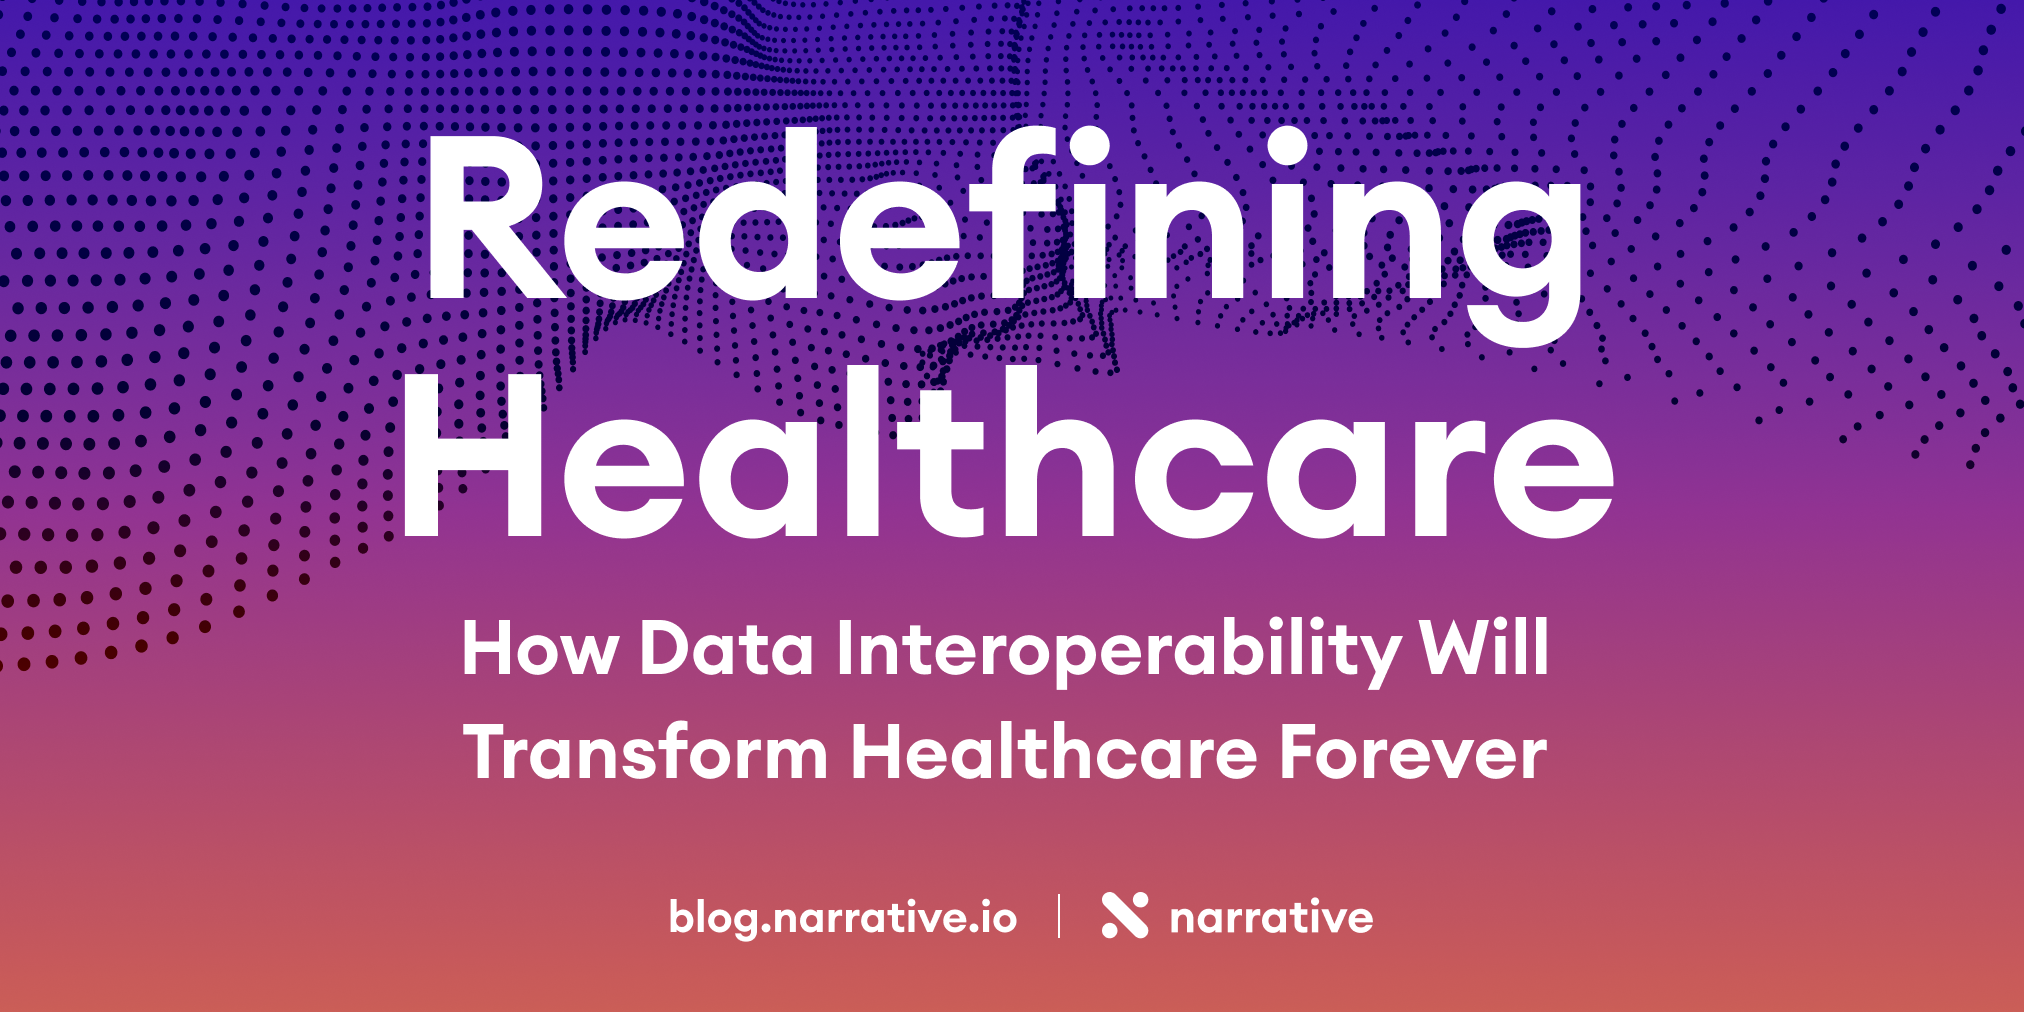 Redefining Healthcare: How Data Interoperability Will Transform Healthcare Forever